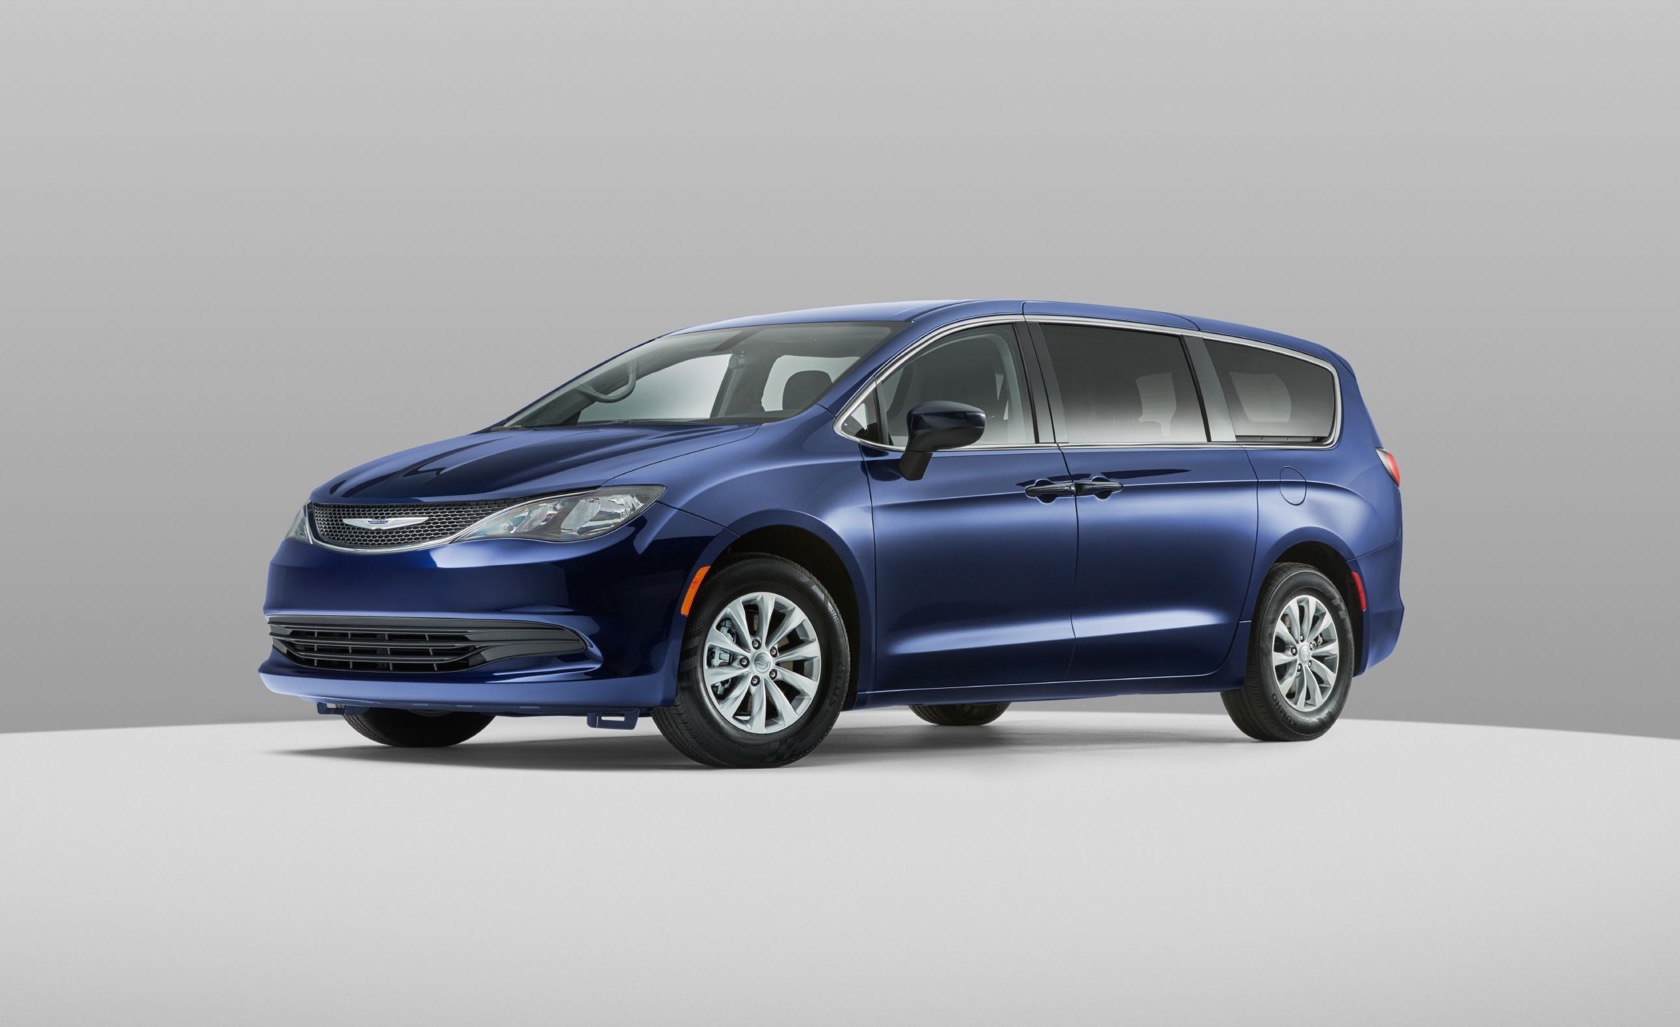 2020 Chrysler Voyager is a budget 